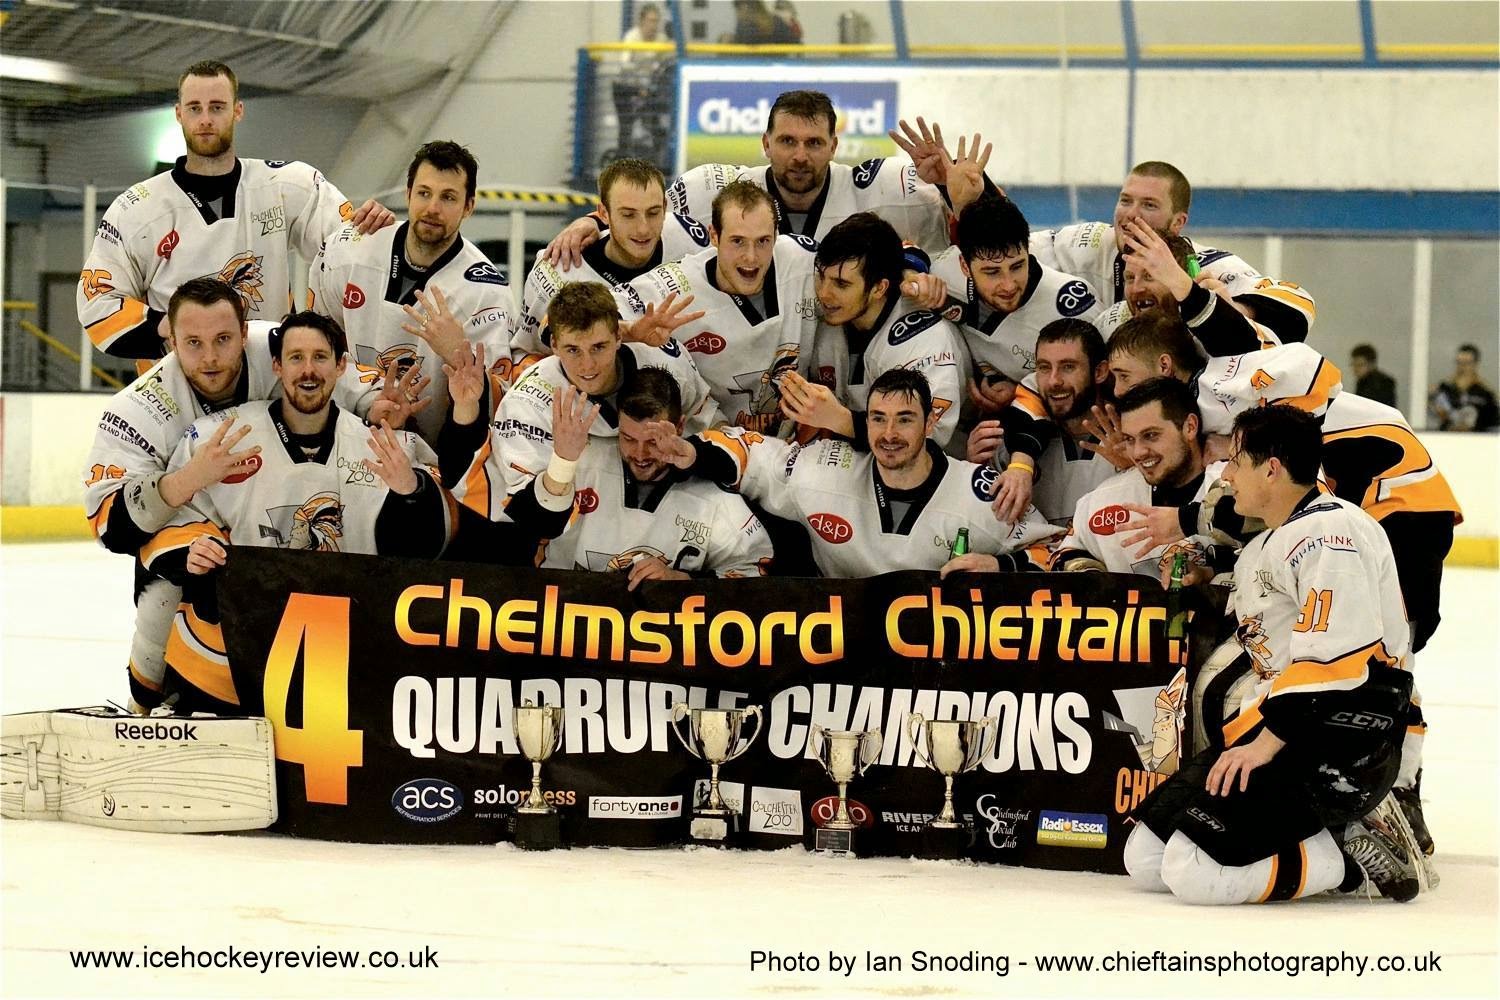 Chelmsford Chieftains Ice Hockey